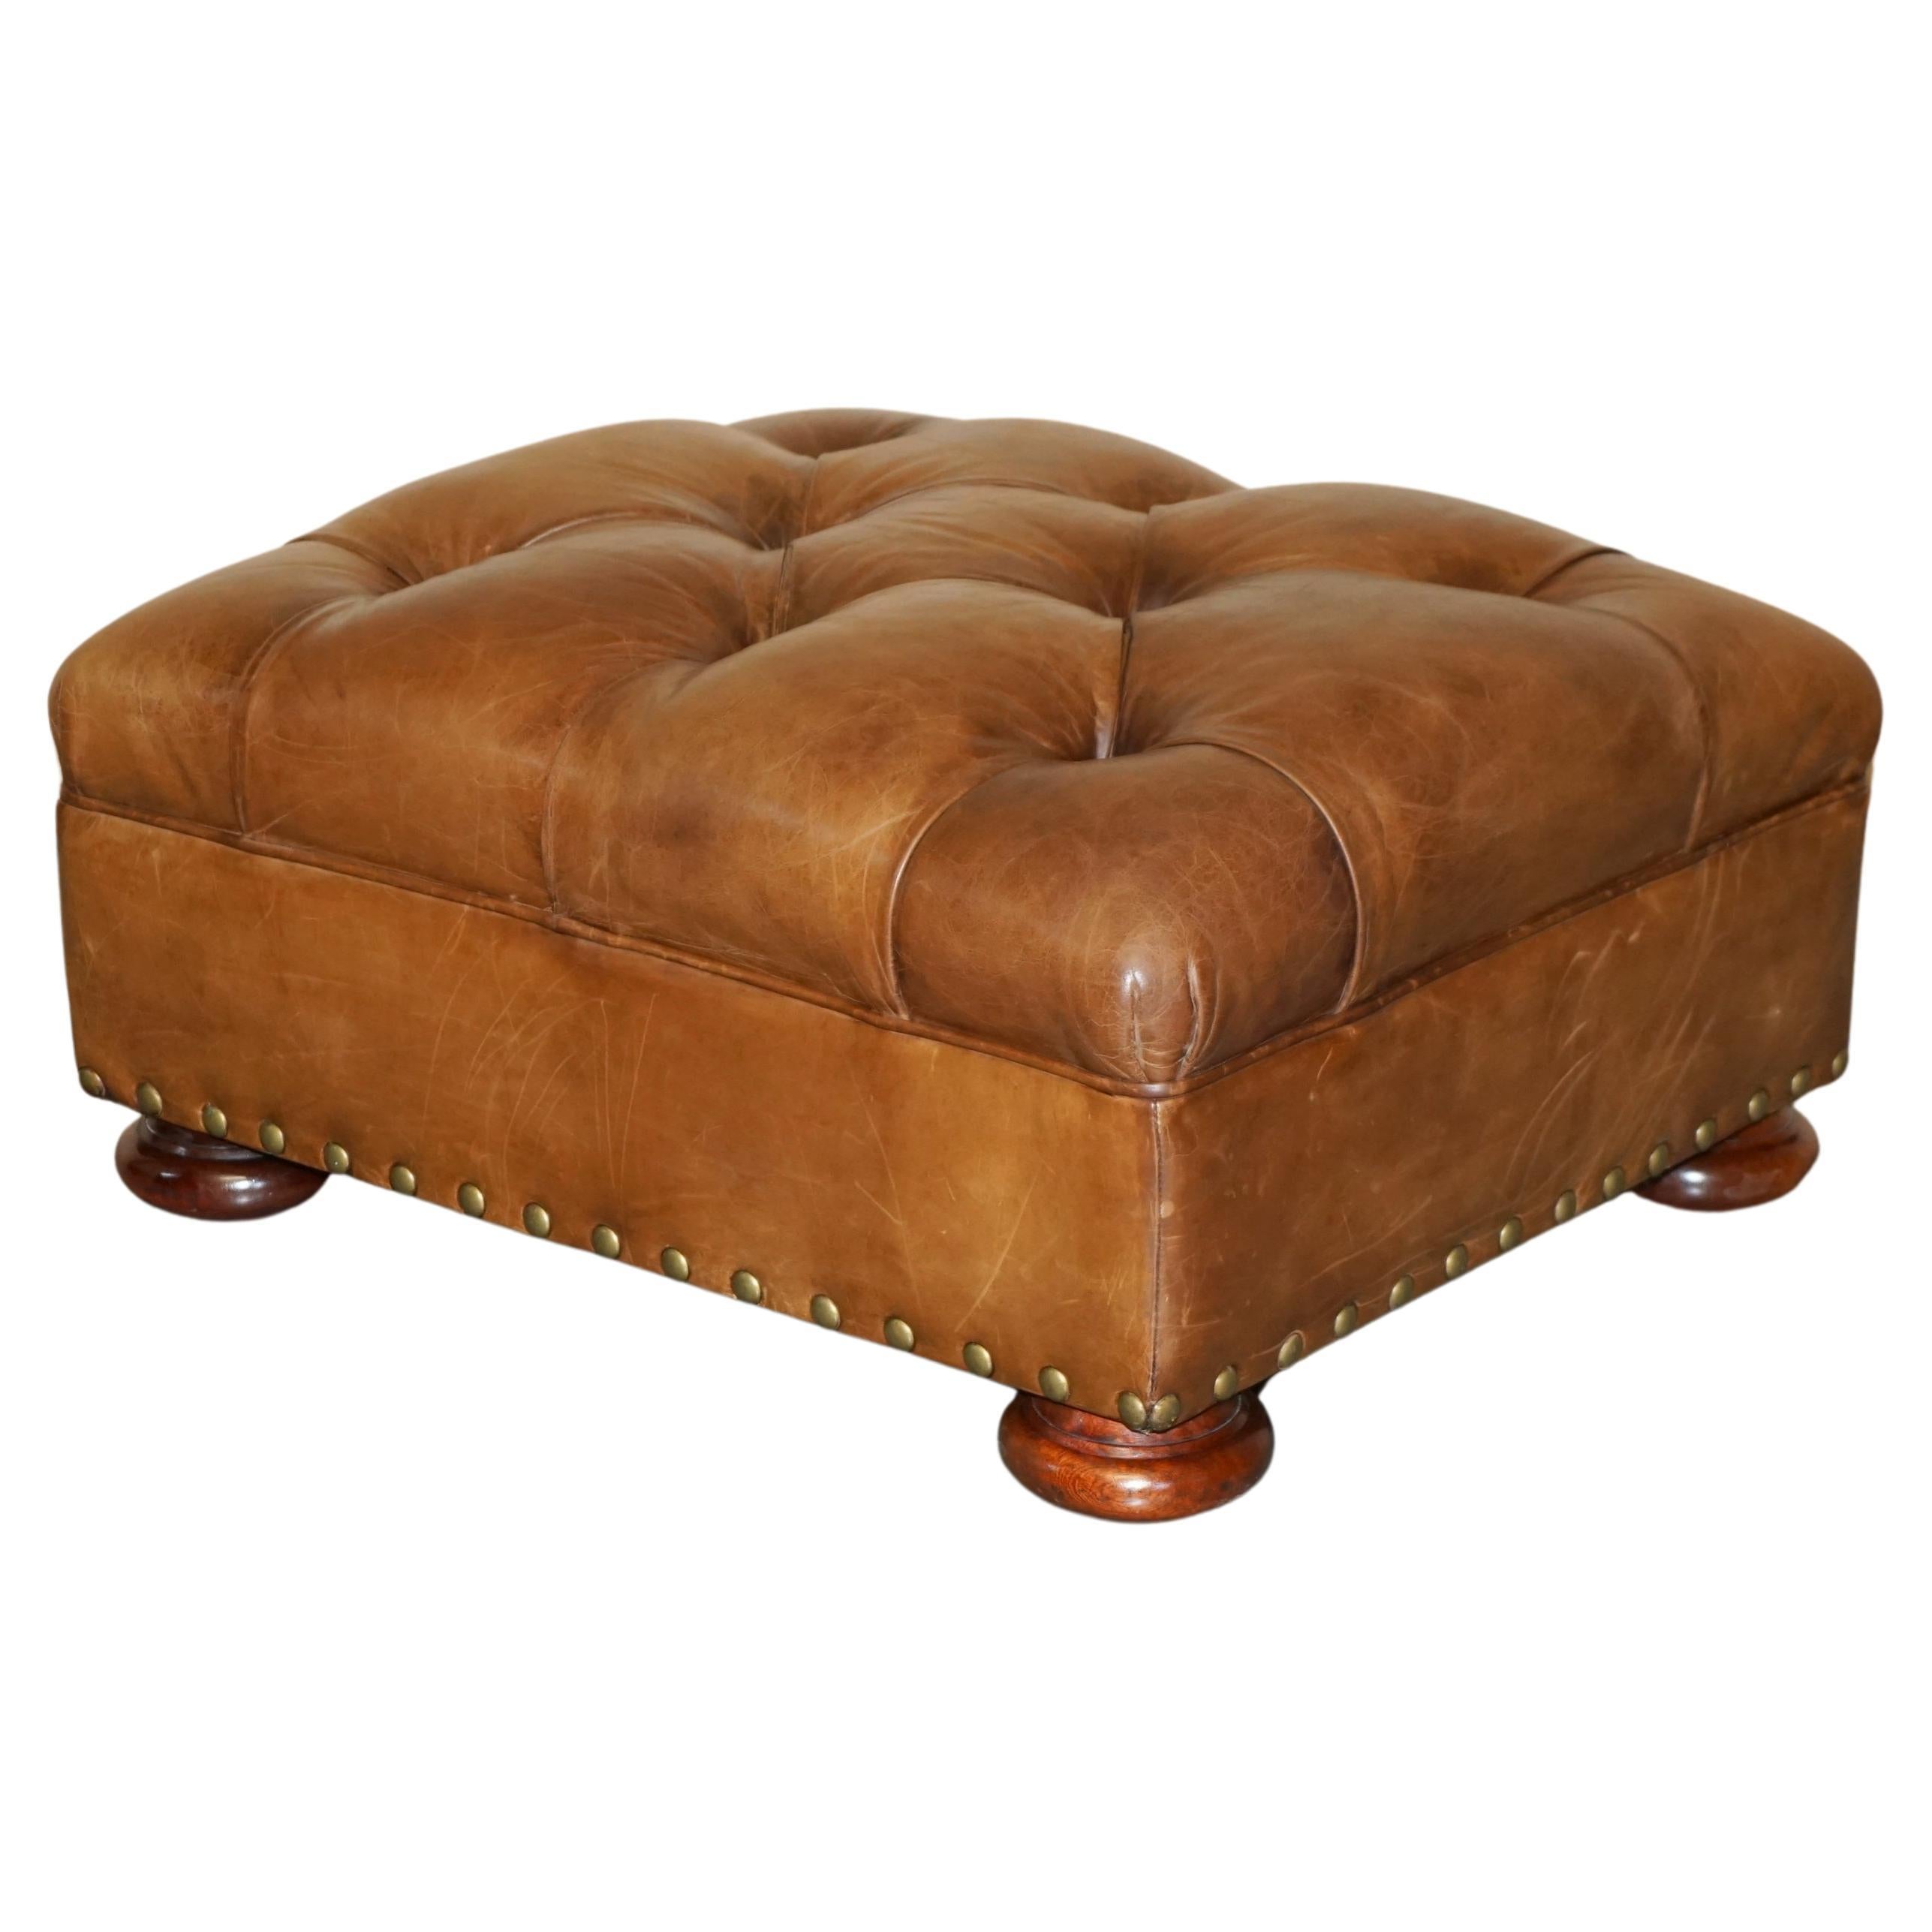 RALPH LAUREN WRITER'S CHESTERFIELD FOOTSTOOL OTTOMAN IN HERiTAGE BROWN LEATHER For Sale